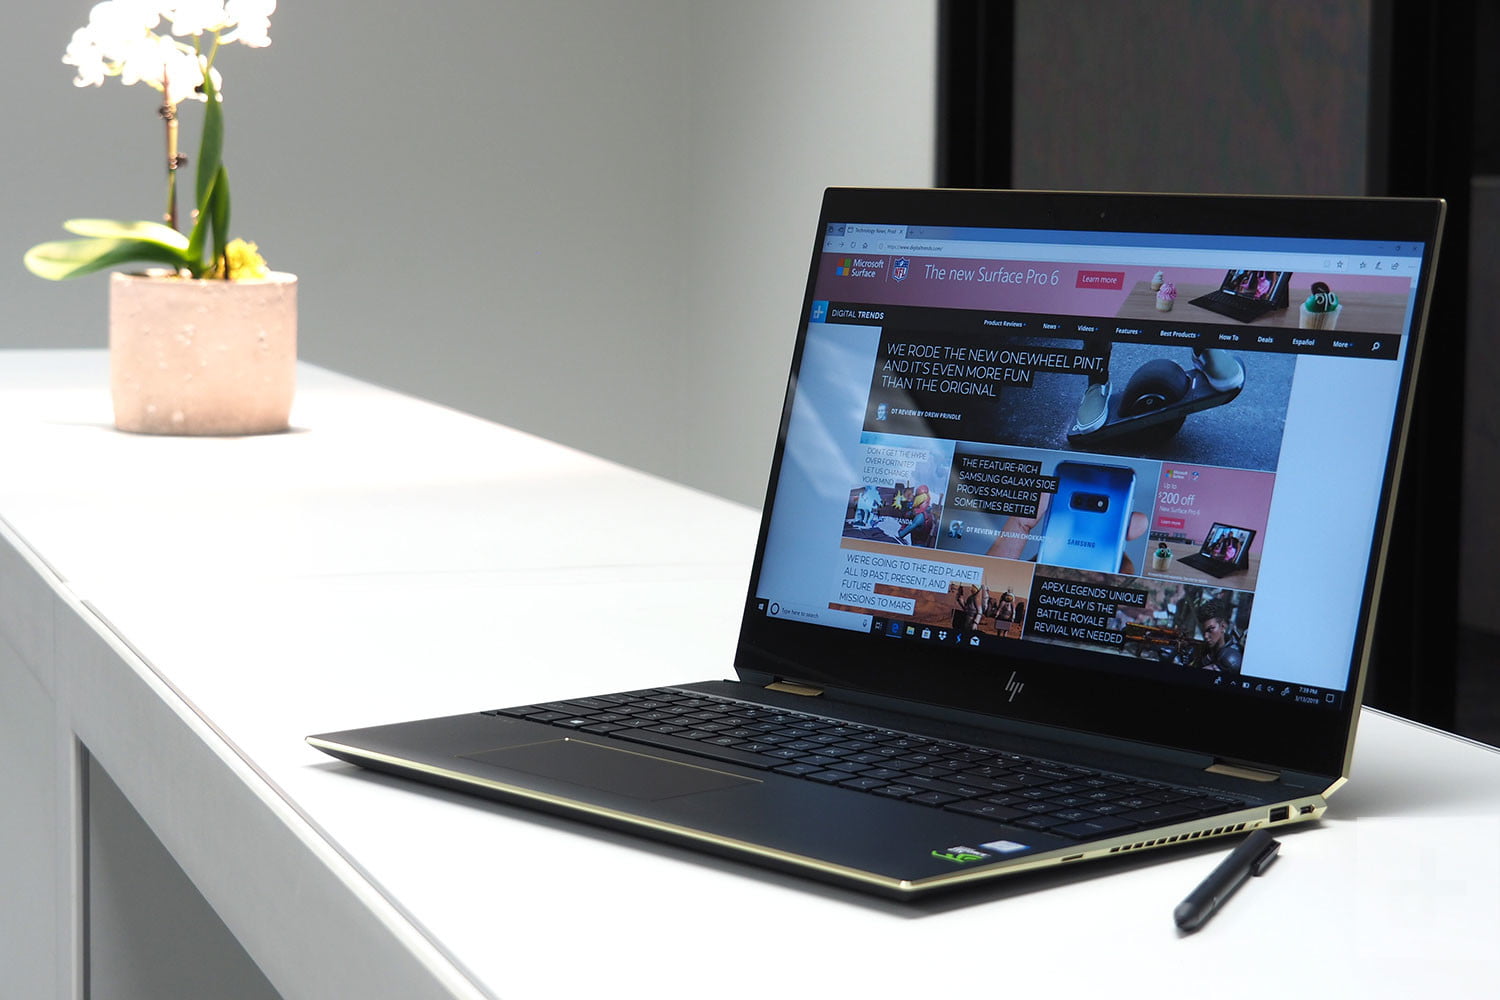 The HP Specter X360 lowers the price significantly at the start of the launch day